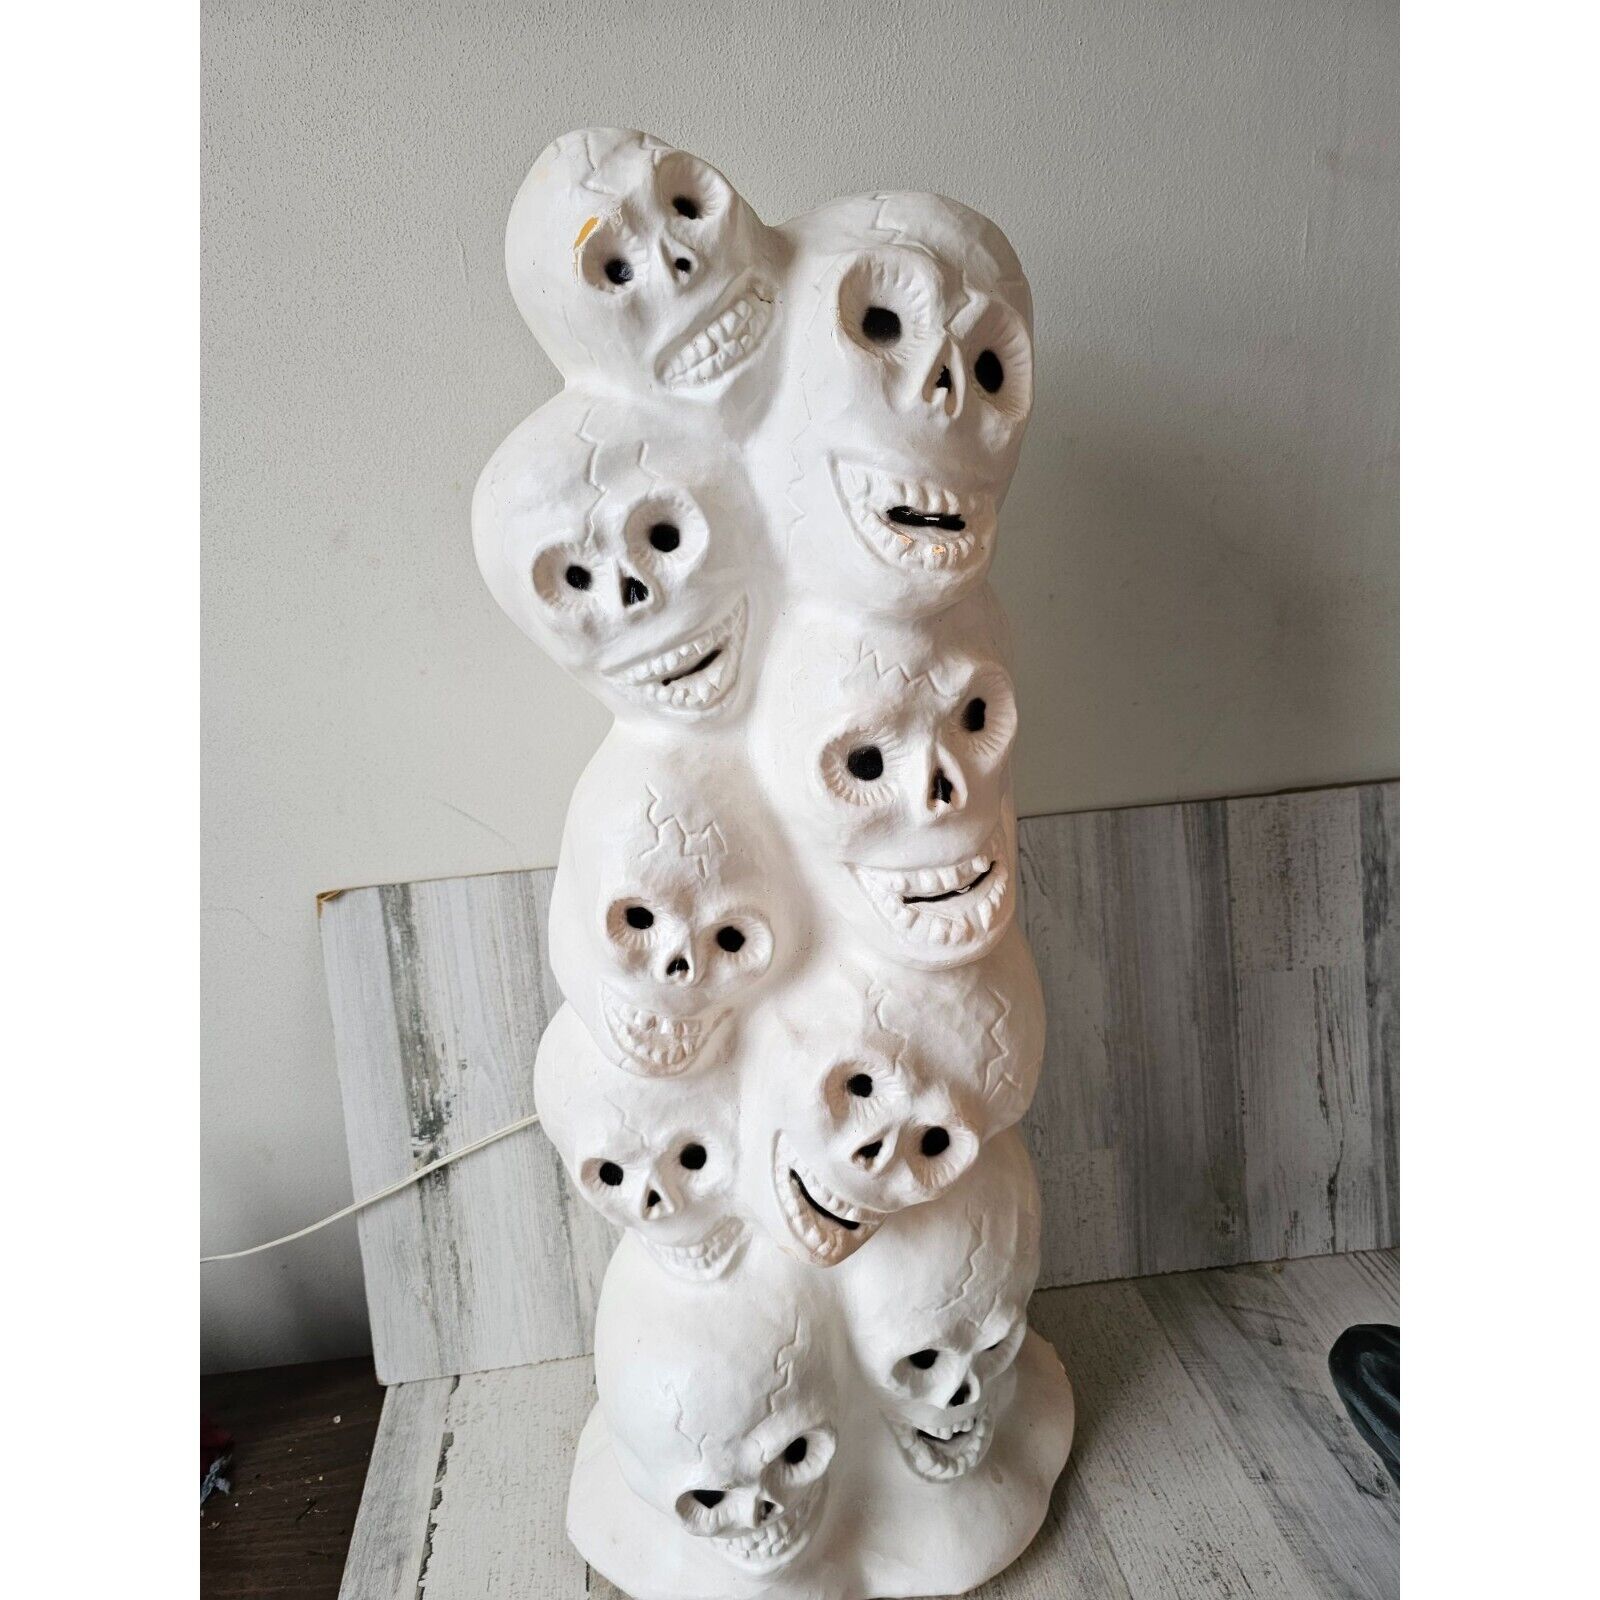 ipl Skeleton totem pole blow mold Halloween one prop decor as is